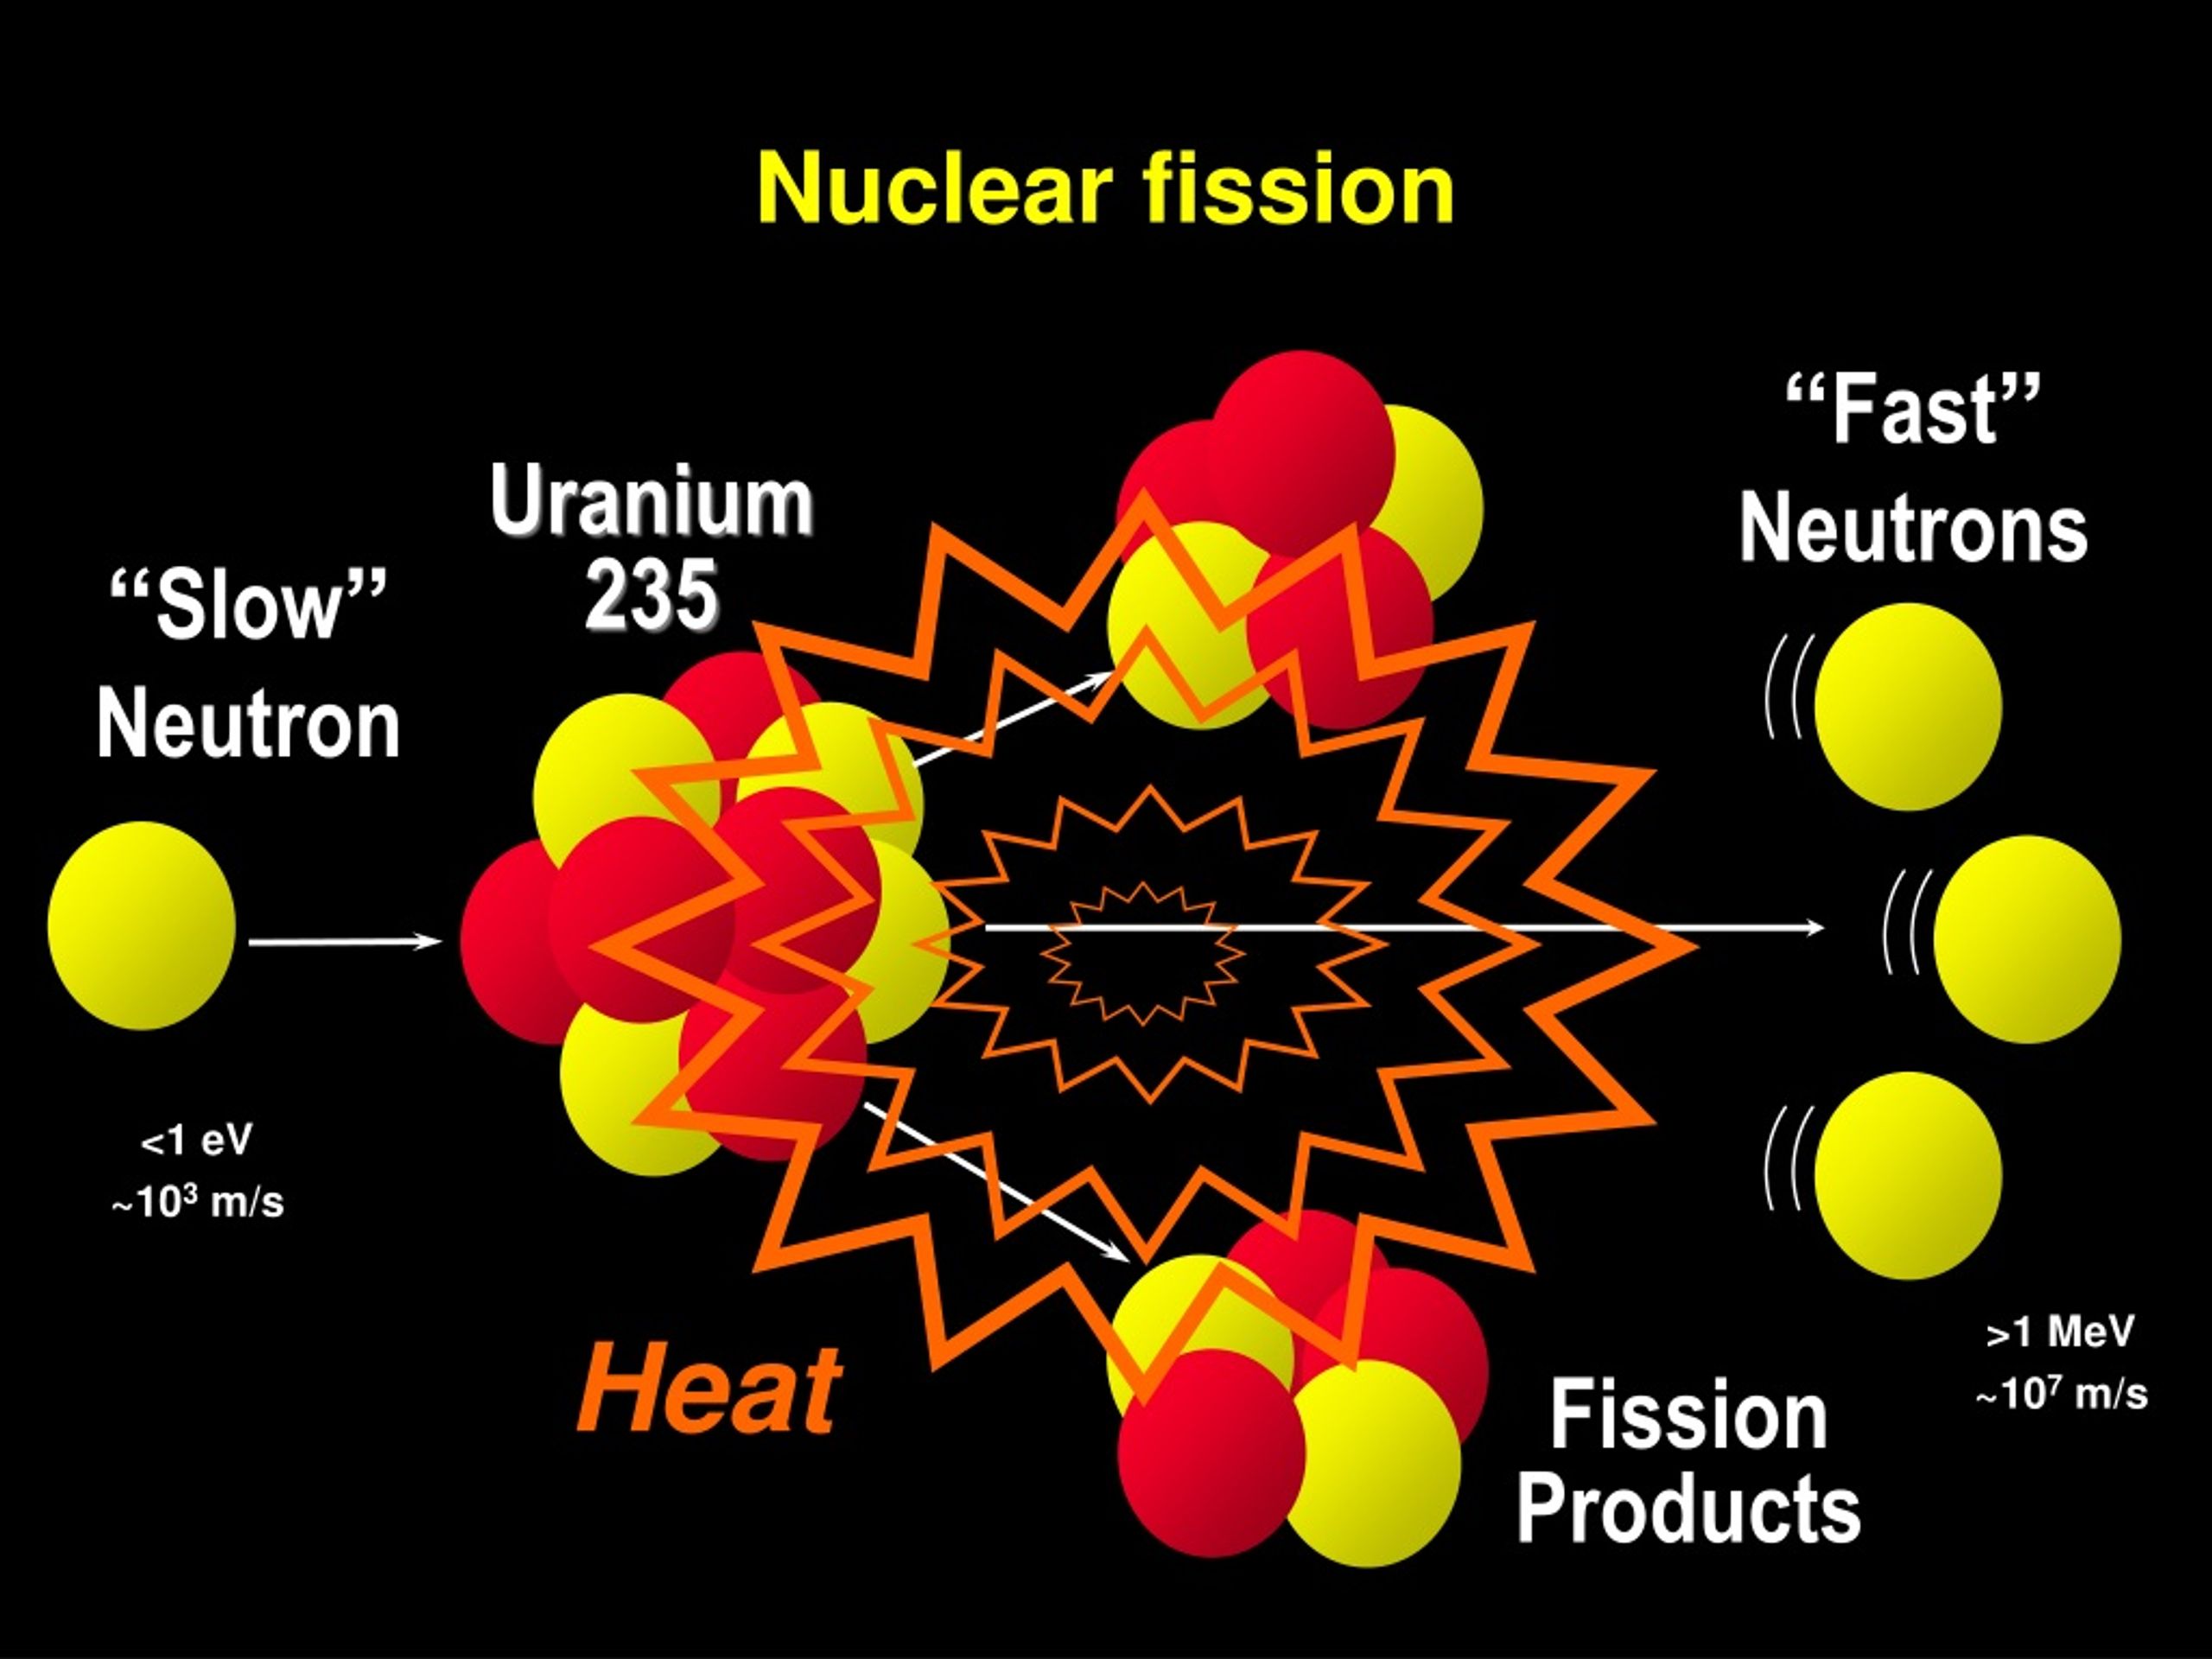 energy of neutron from spontaneous fission